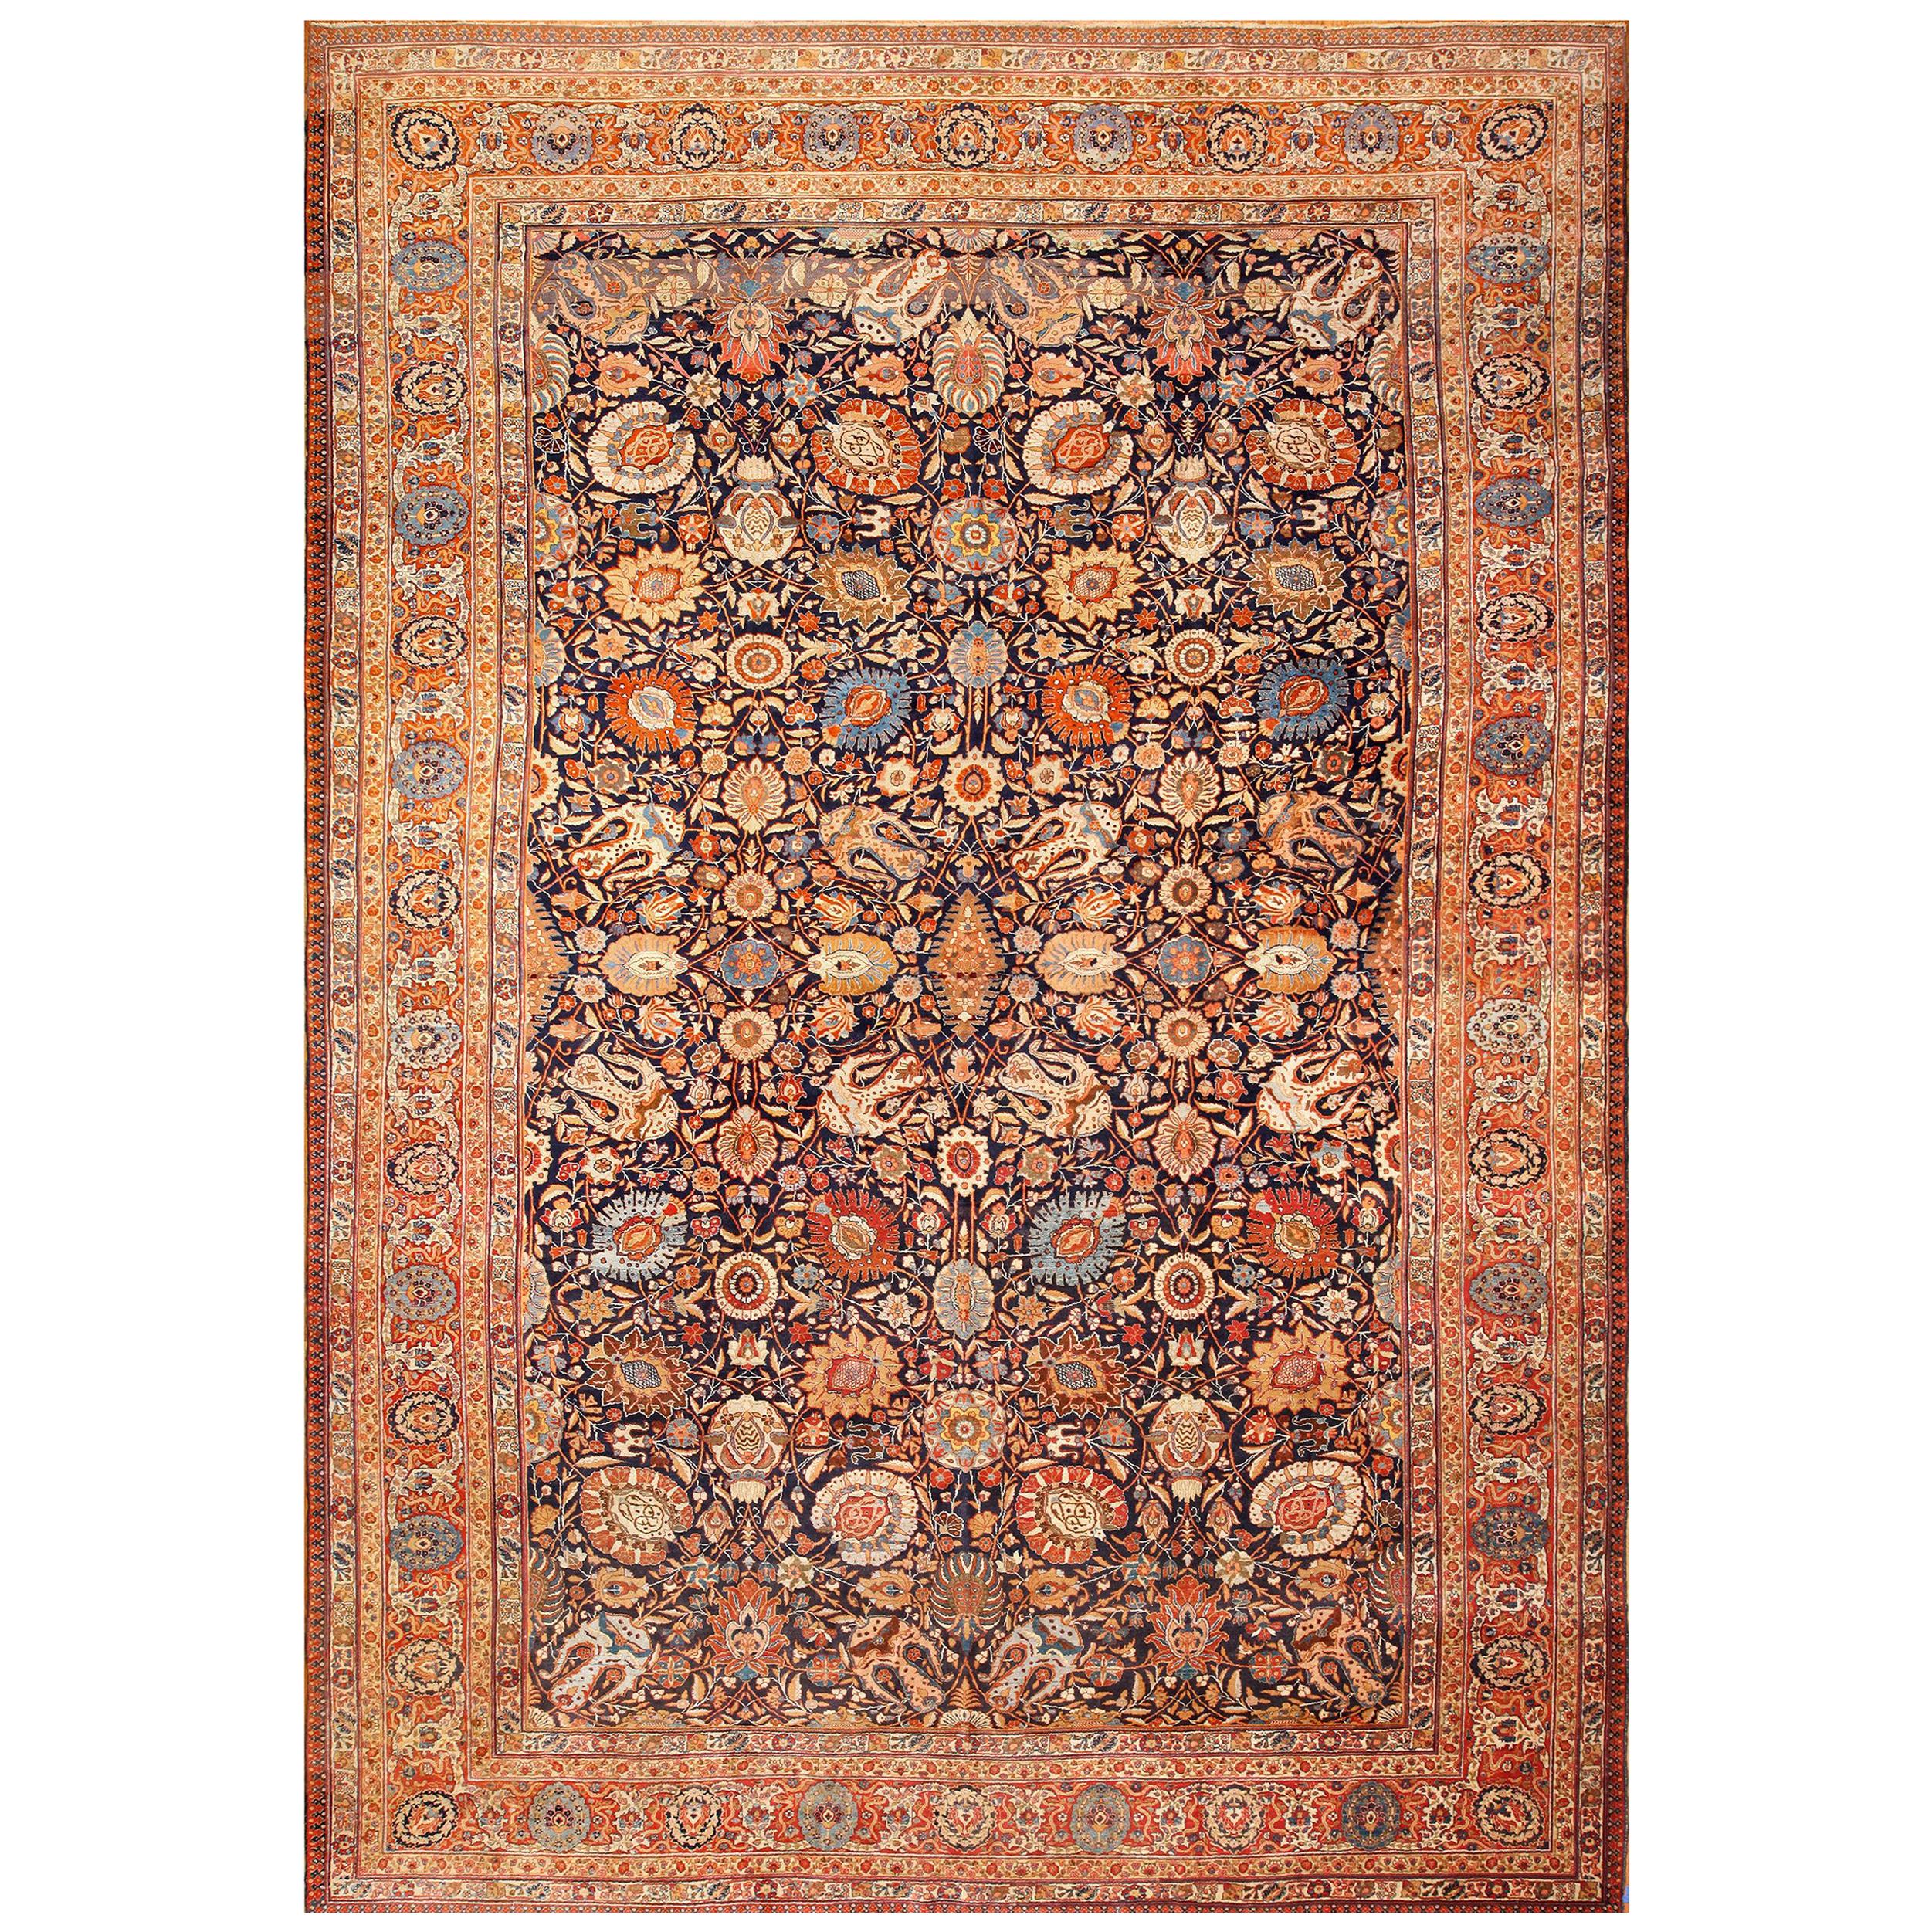 Antique Persian Tabriz Rug. Size: 14 ft 8 in x 22 ft 